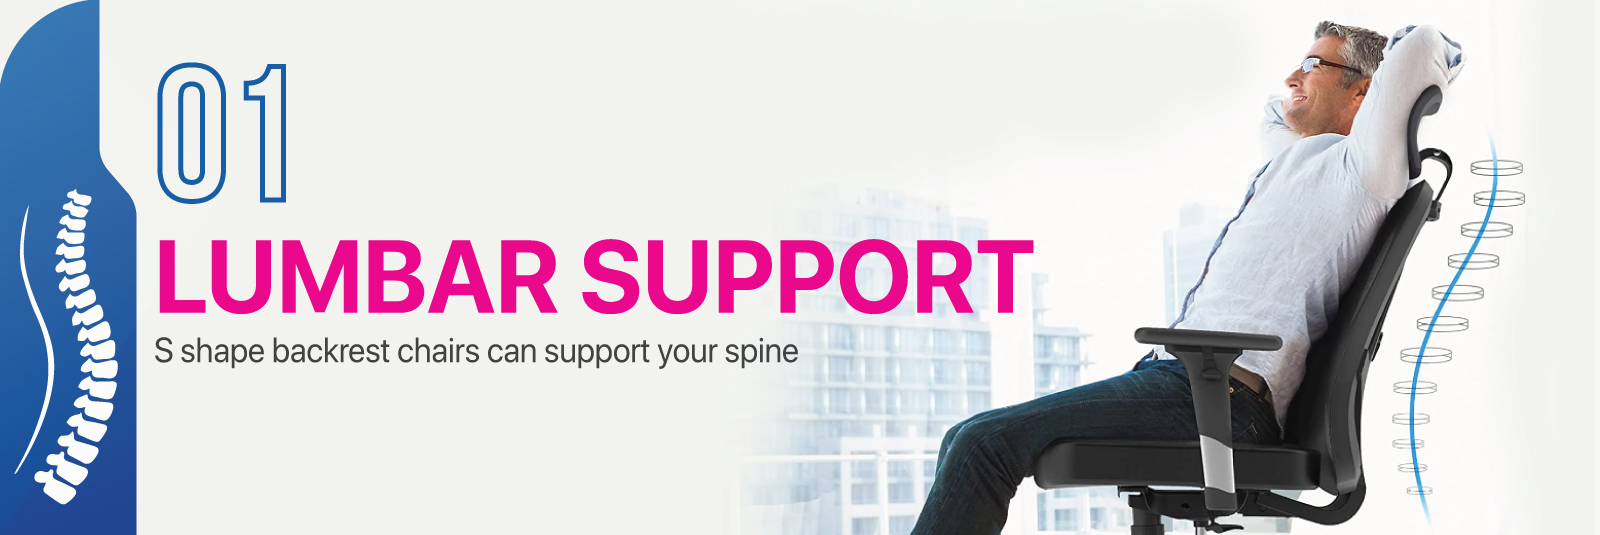 Lumbar Support - S shape backrest chairs can support your spine.